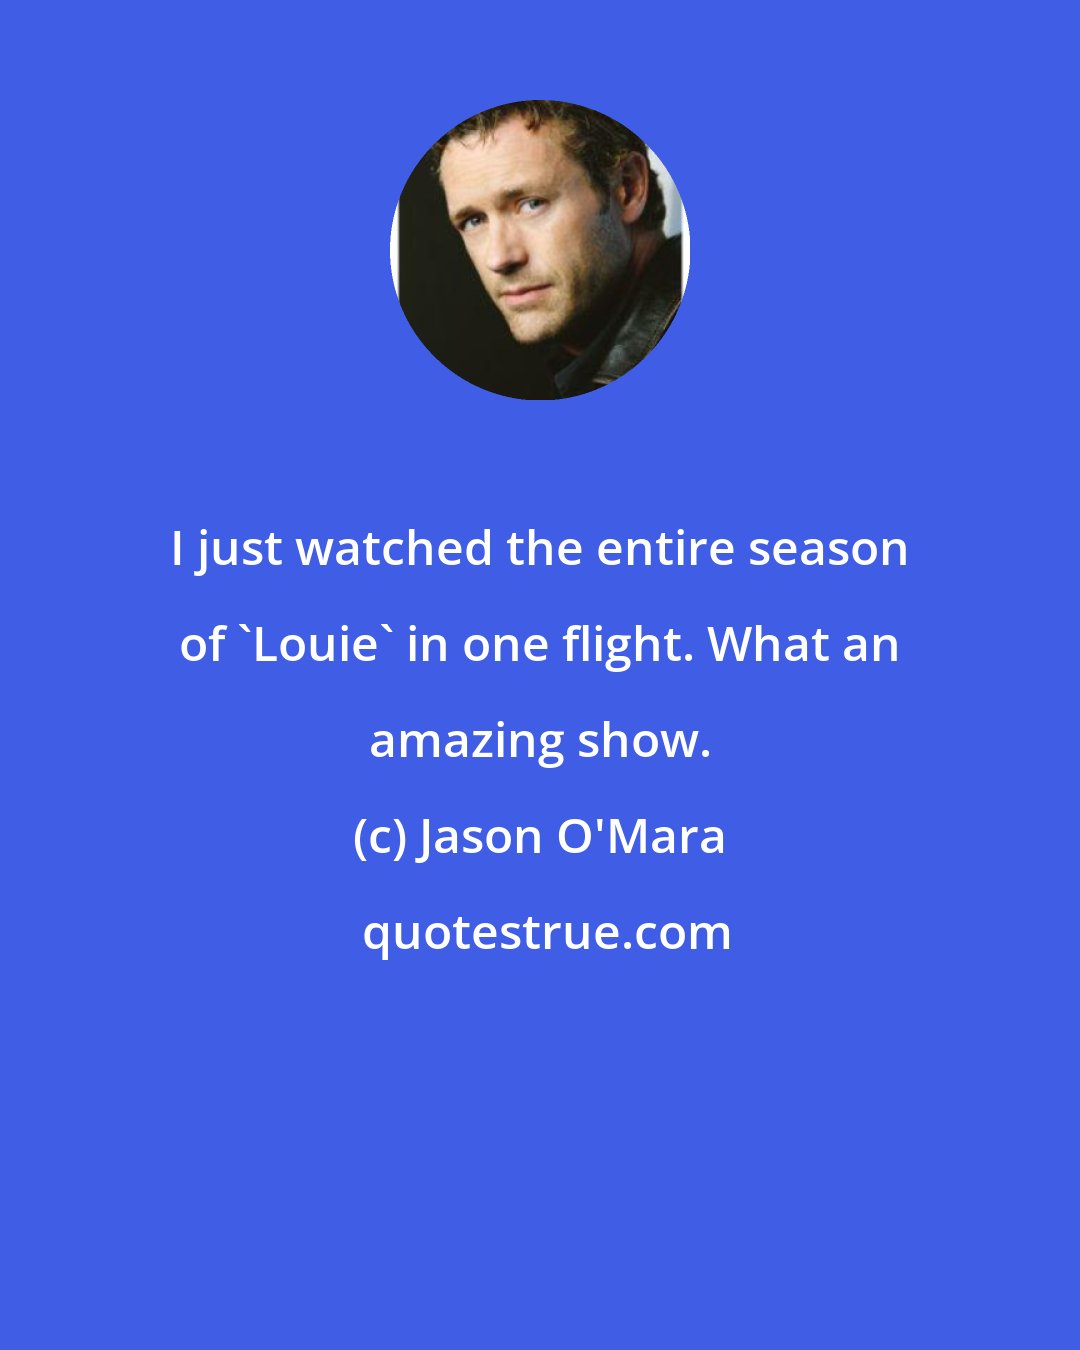 Jason O'Mara: I just watched the entire season of 'Louie' in one flight. What an amazing show.